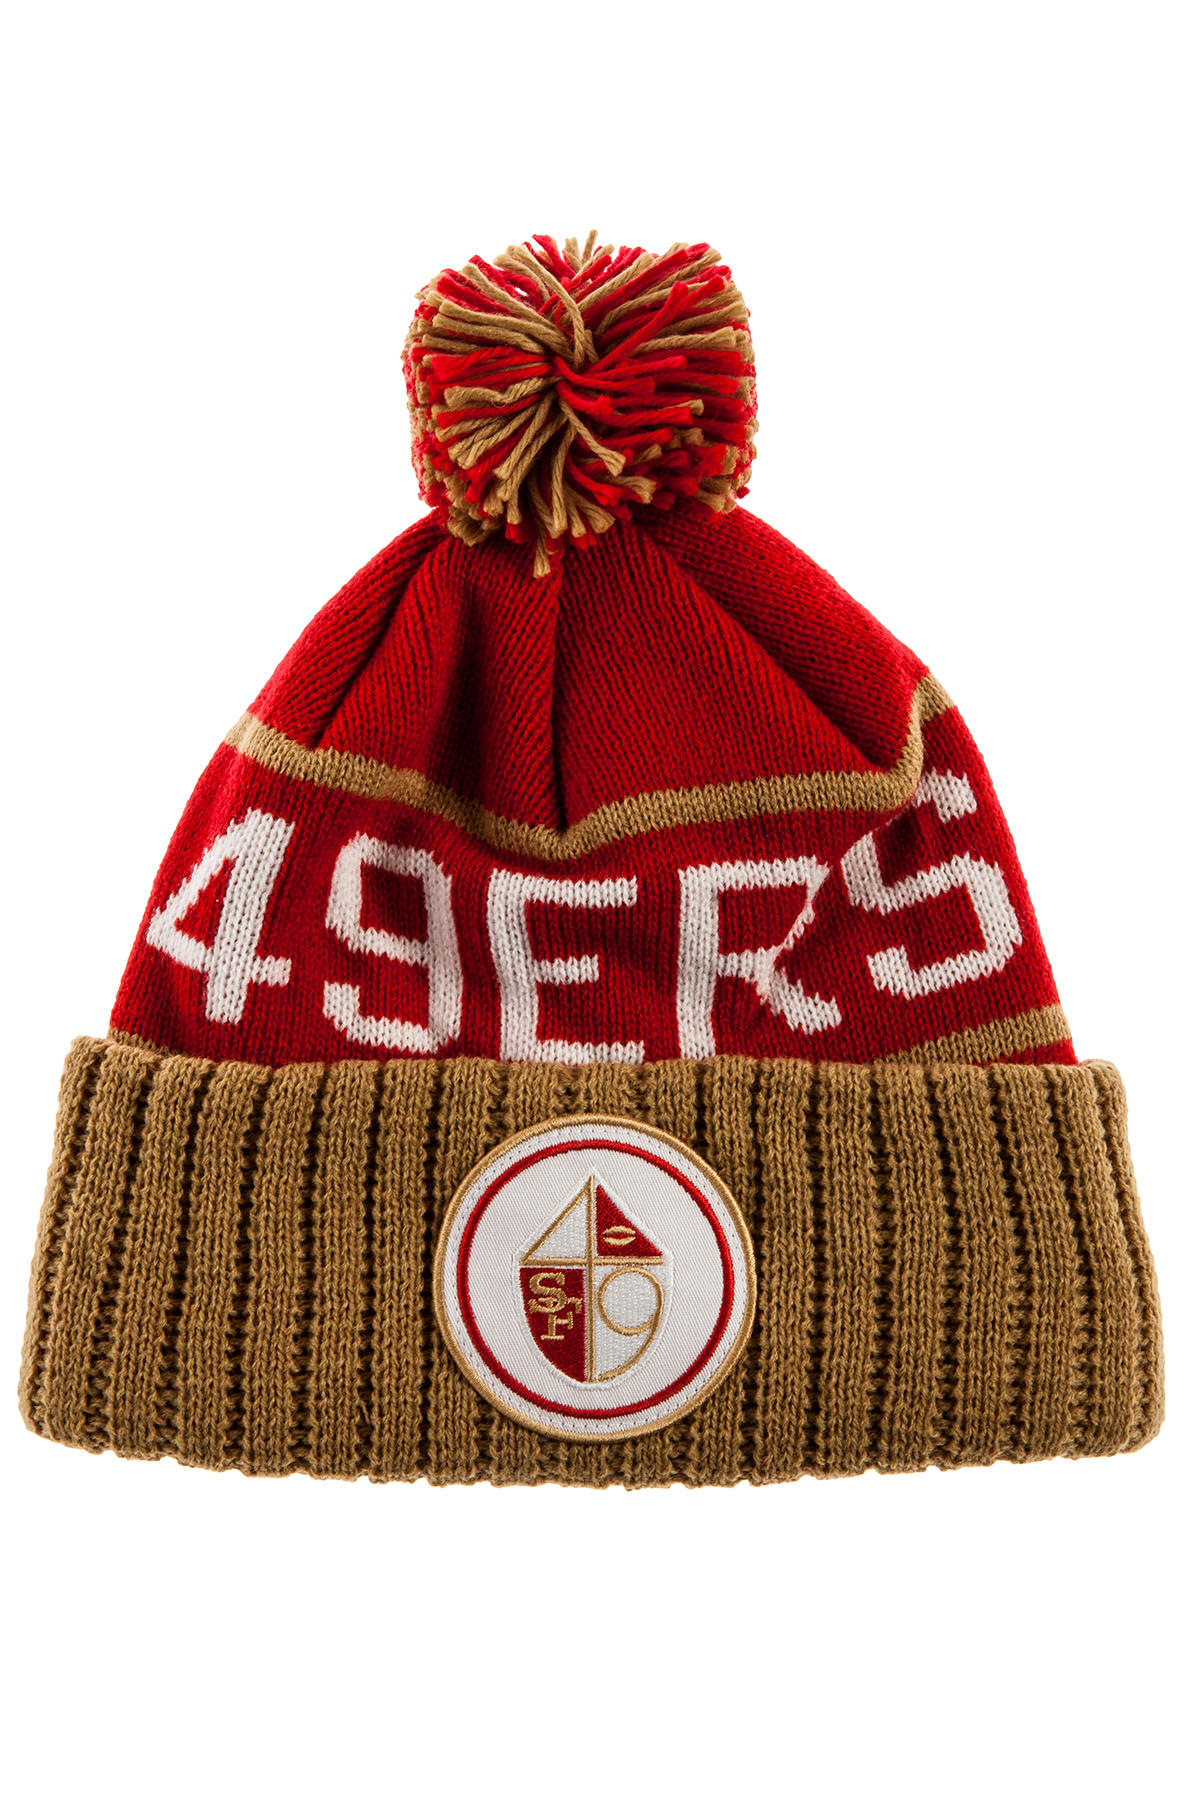 MITCHELL & NESS The San Francisco 49ers High 5 Beanie in Red & Gold  KJ48Z-MTC-649ERS - Karmaloop